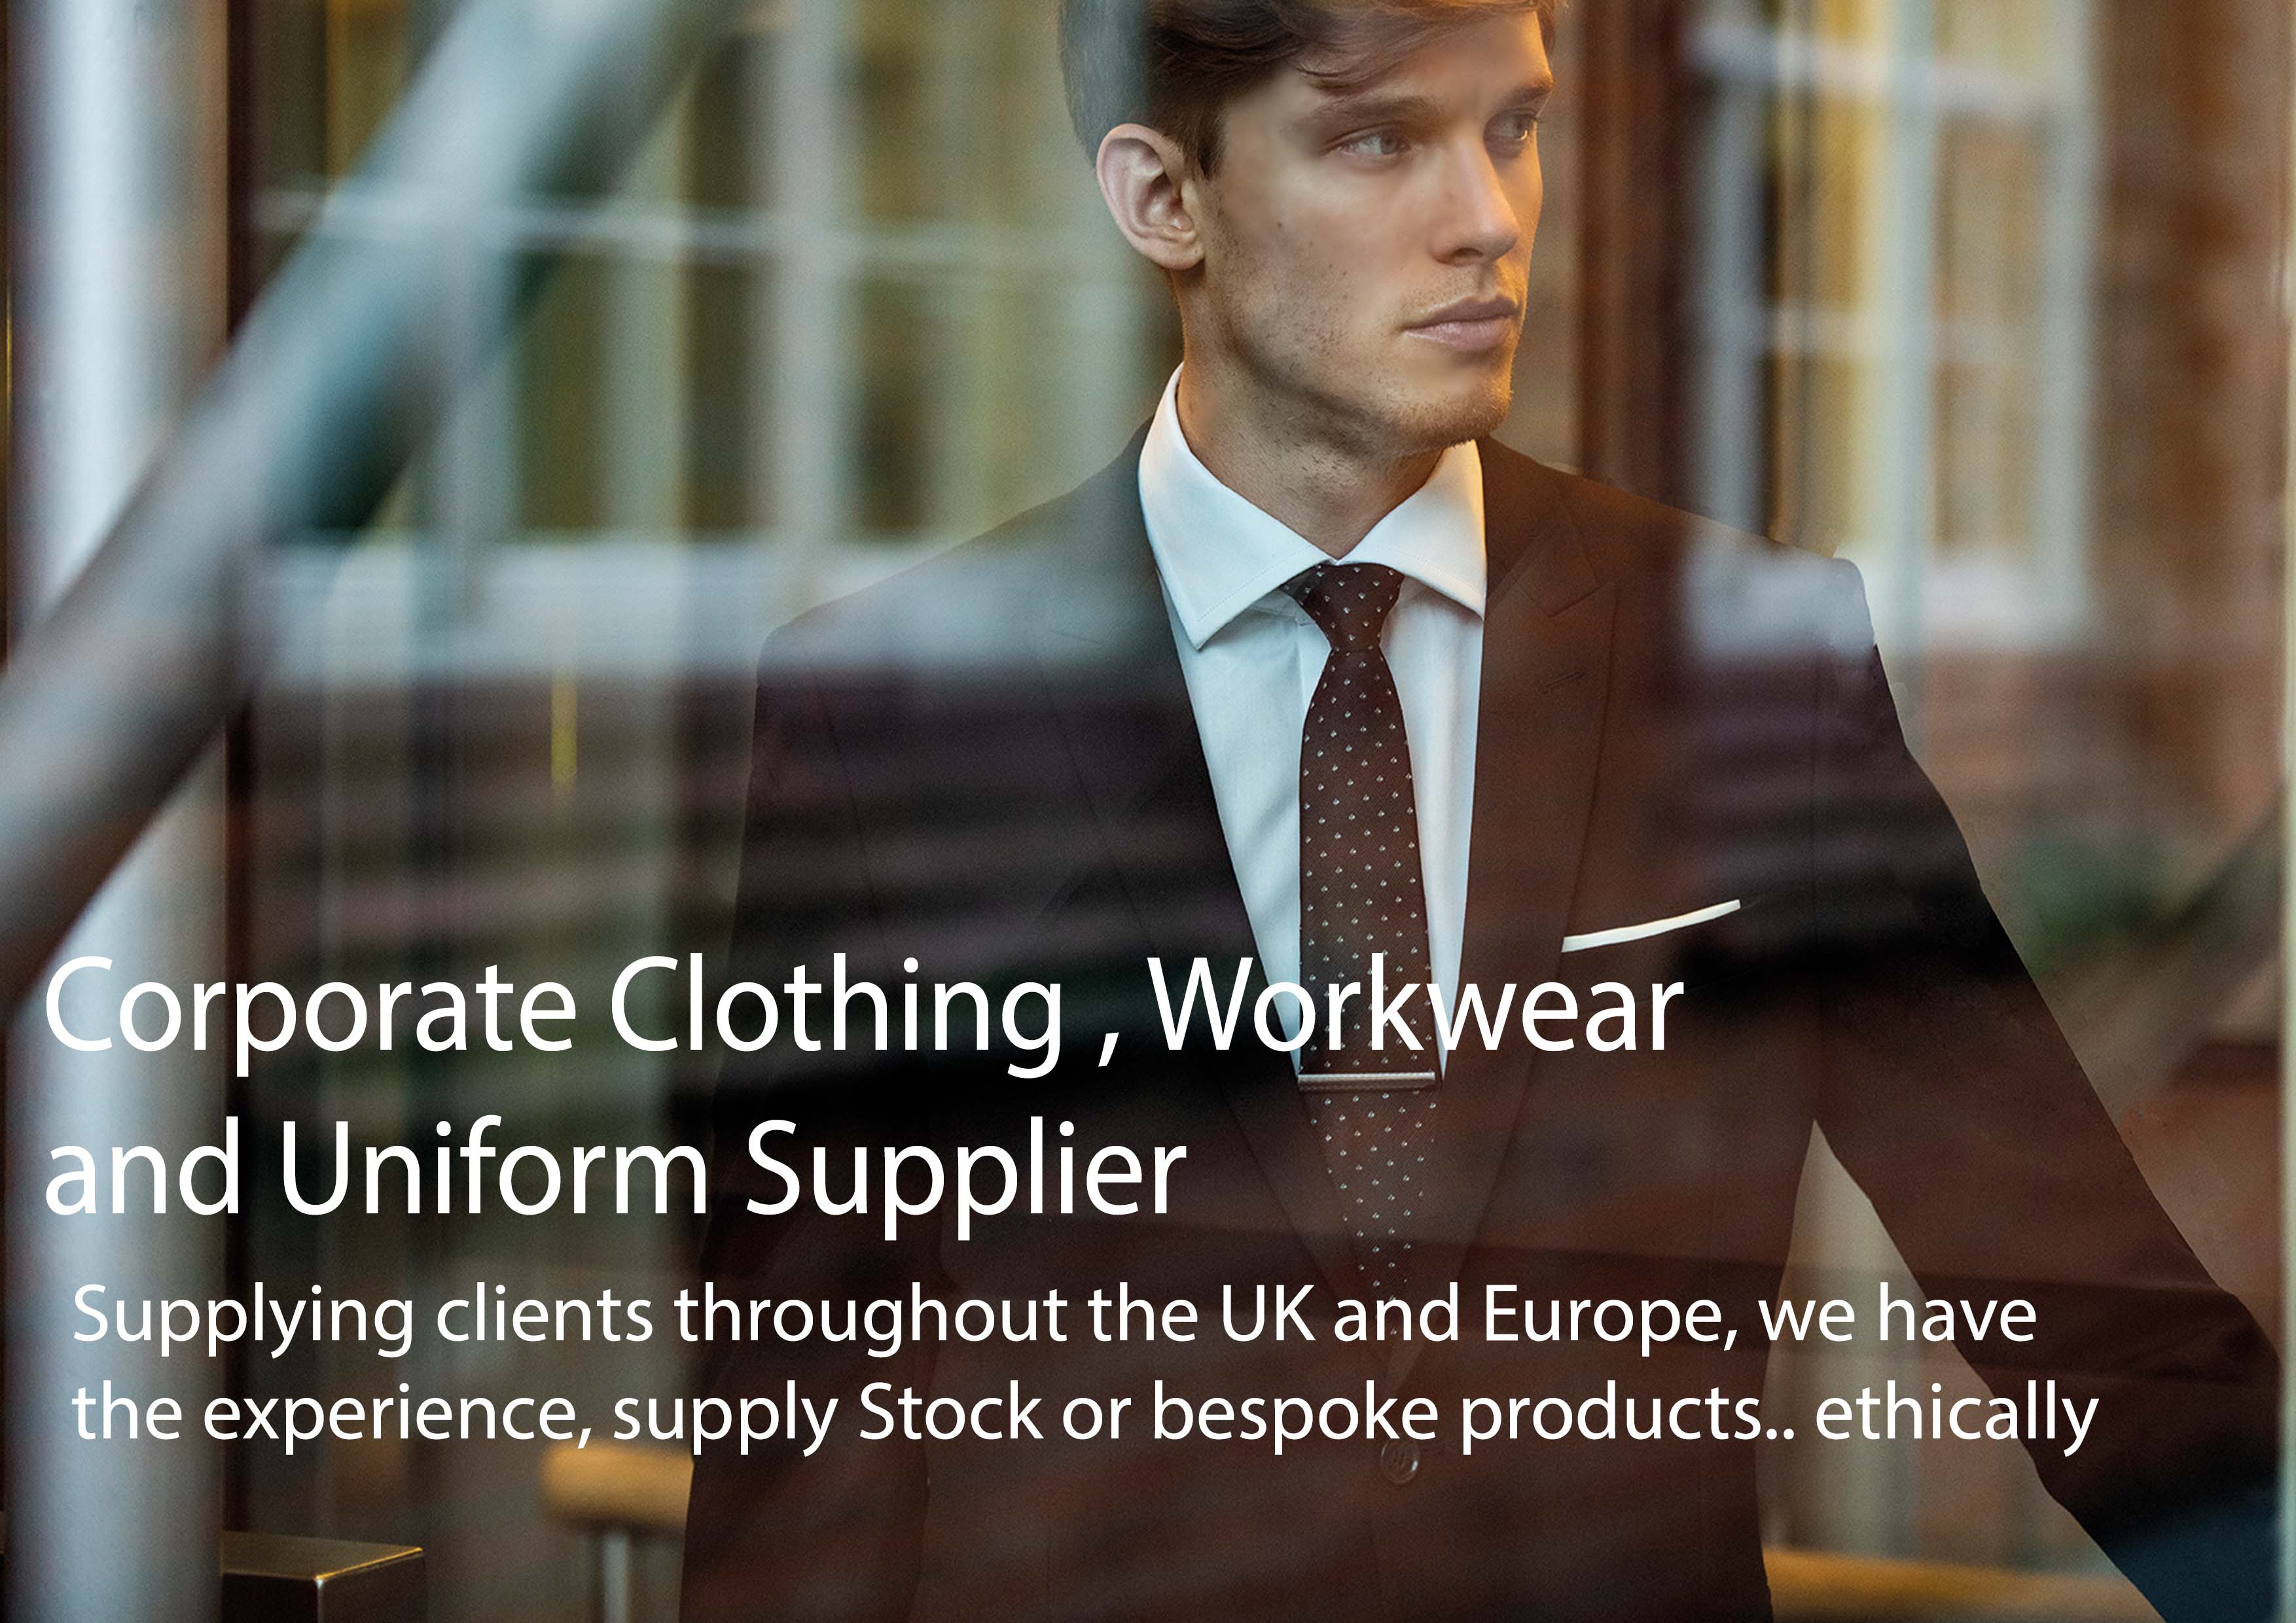 Choosing a Corporate clothing supplier